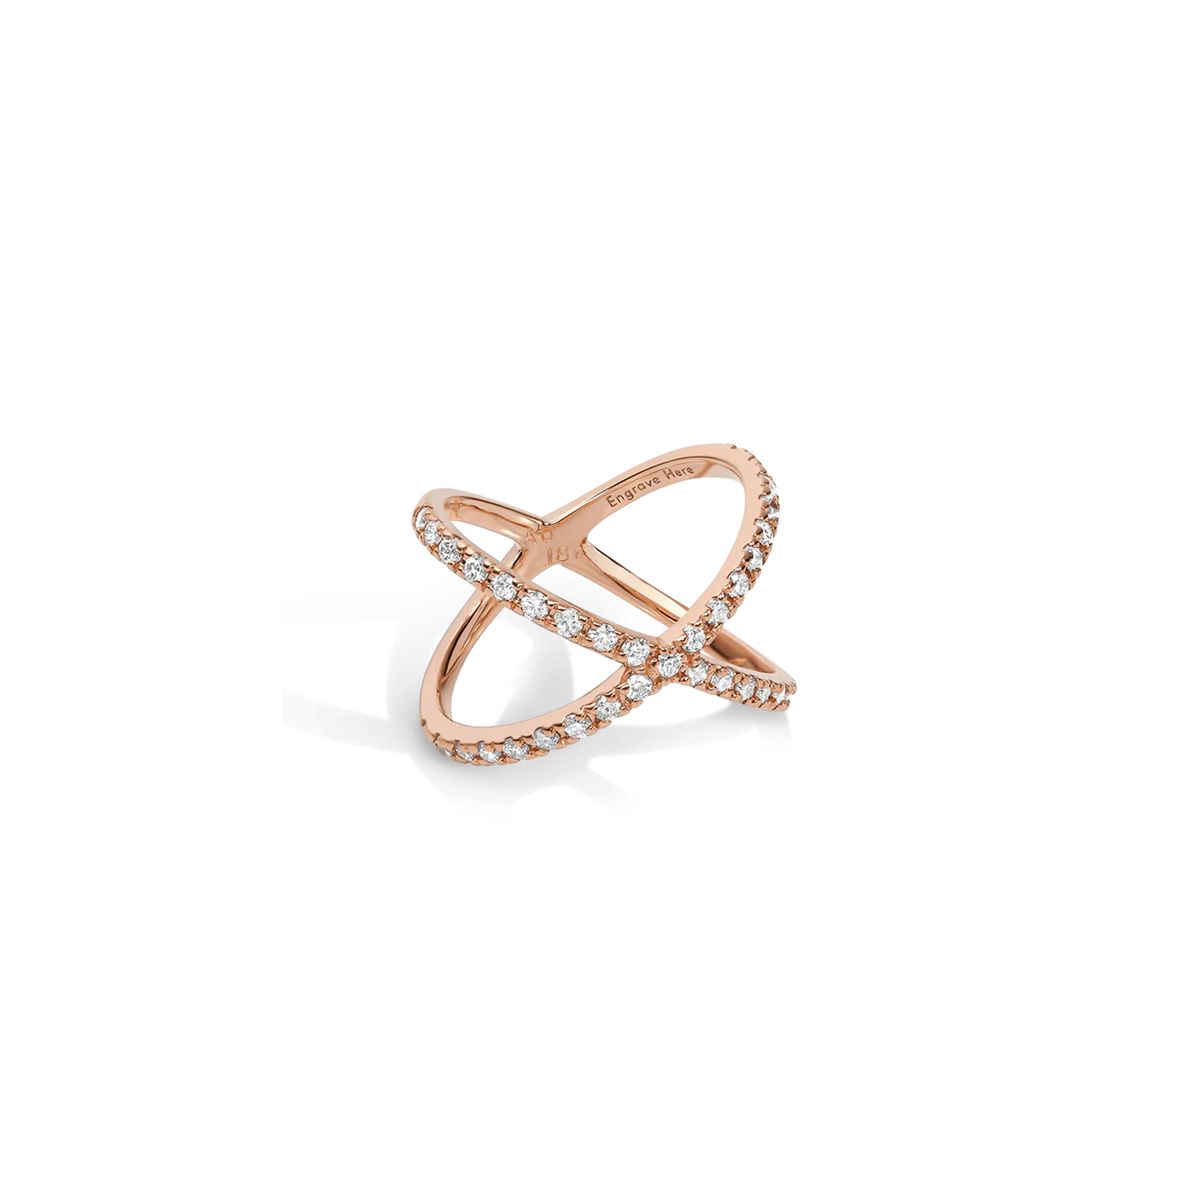 X Ring with White Diamonds | AUrate New York